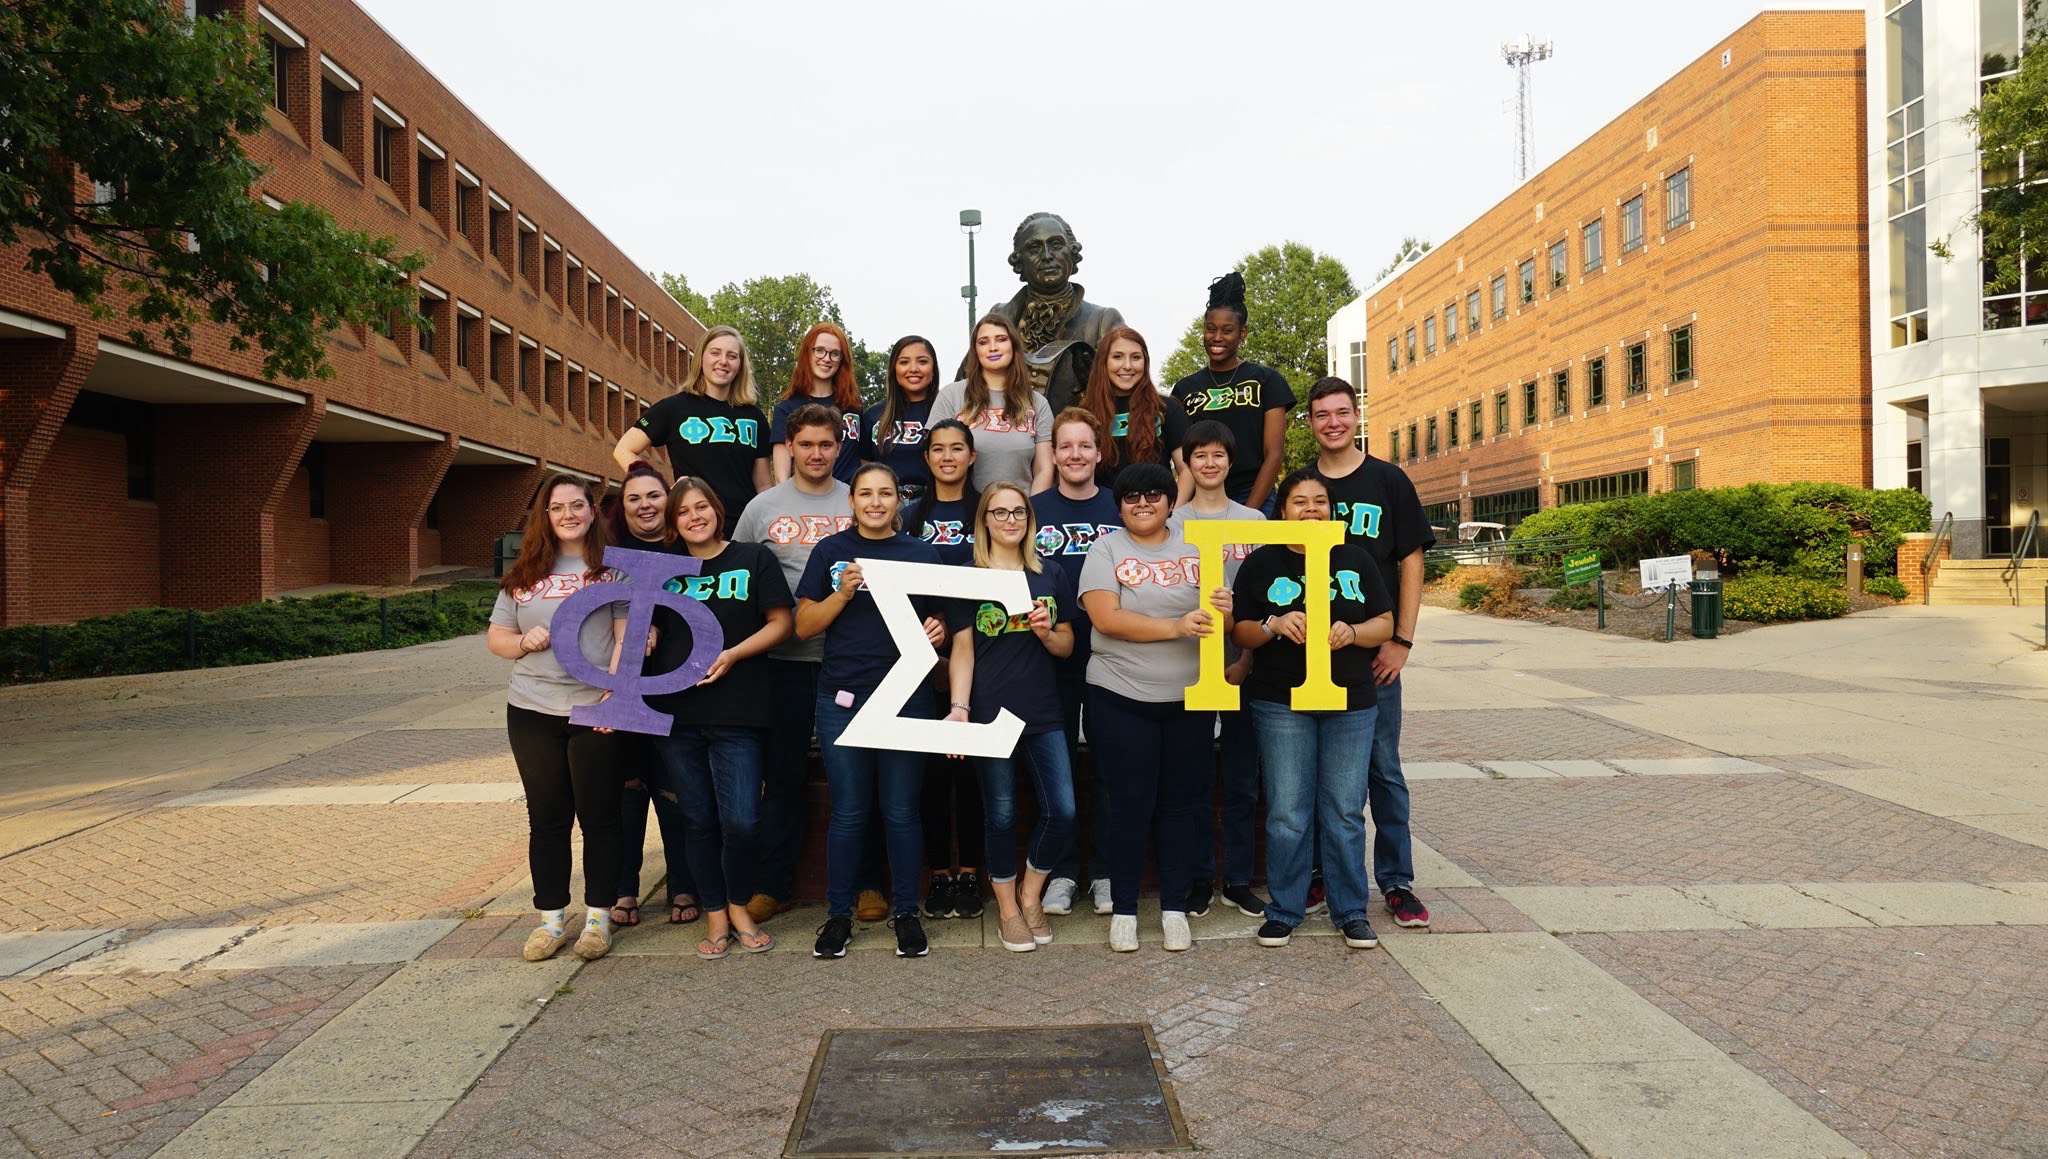 Members of the Zeta Delta Chapter posing in front of the Mason statue.